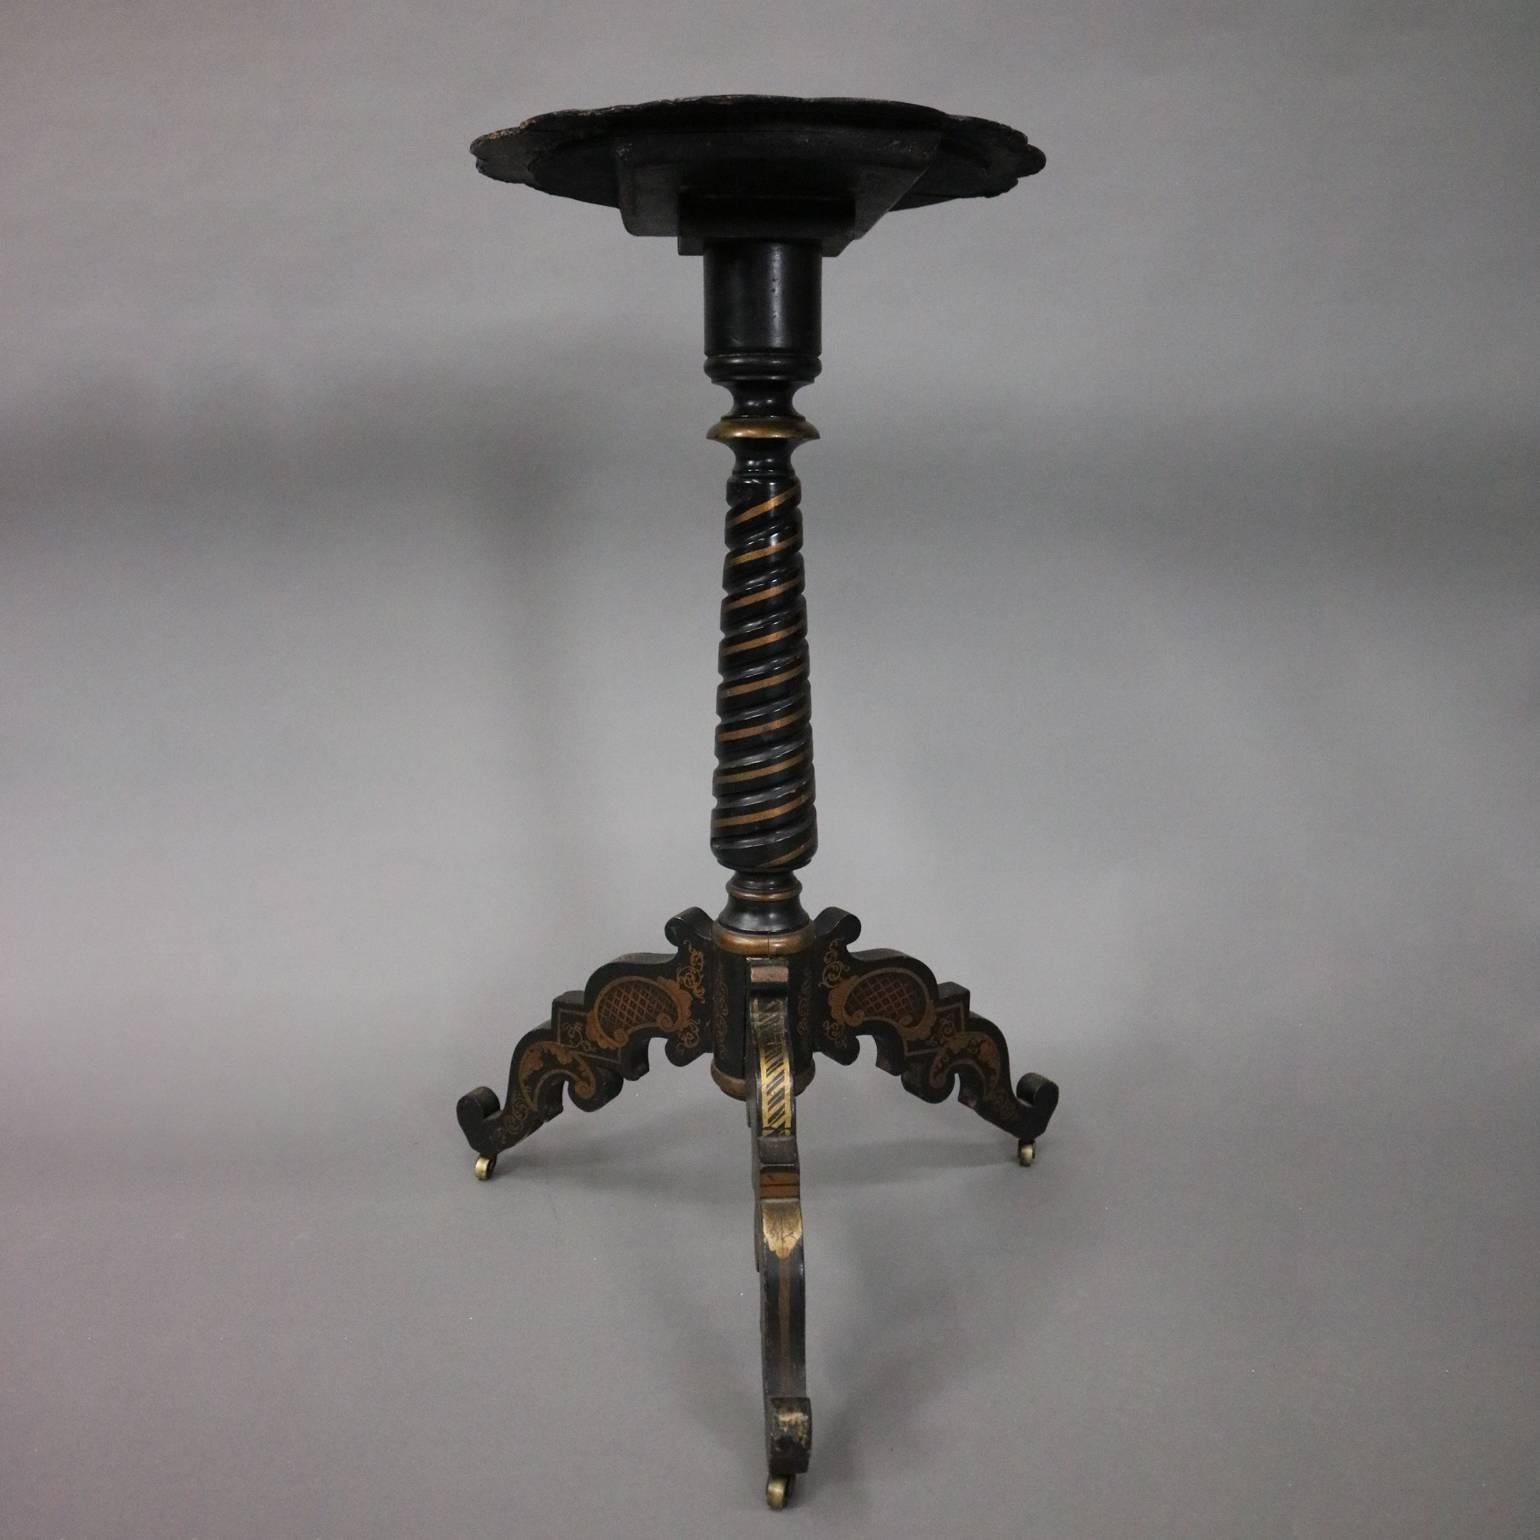 Antique candle stand features hand-painted Romanesque and floral papier mâché tilt top above gilt decorated mahogany tripod stand with twisted rope shaft, circa 1880

Measures - 28"h x 13"diam top, 18"diam base